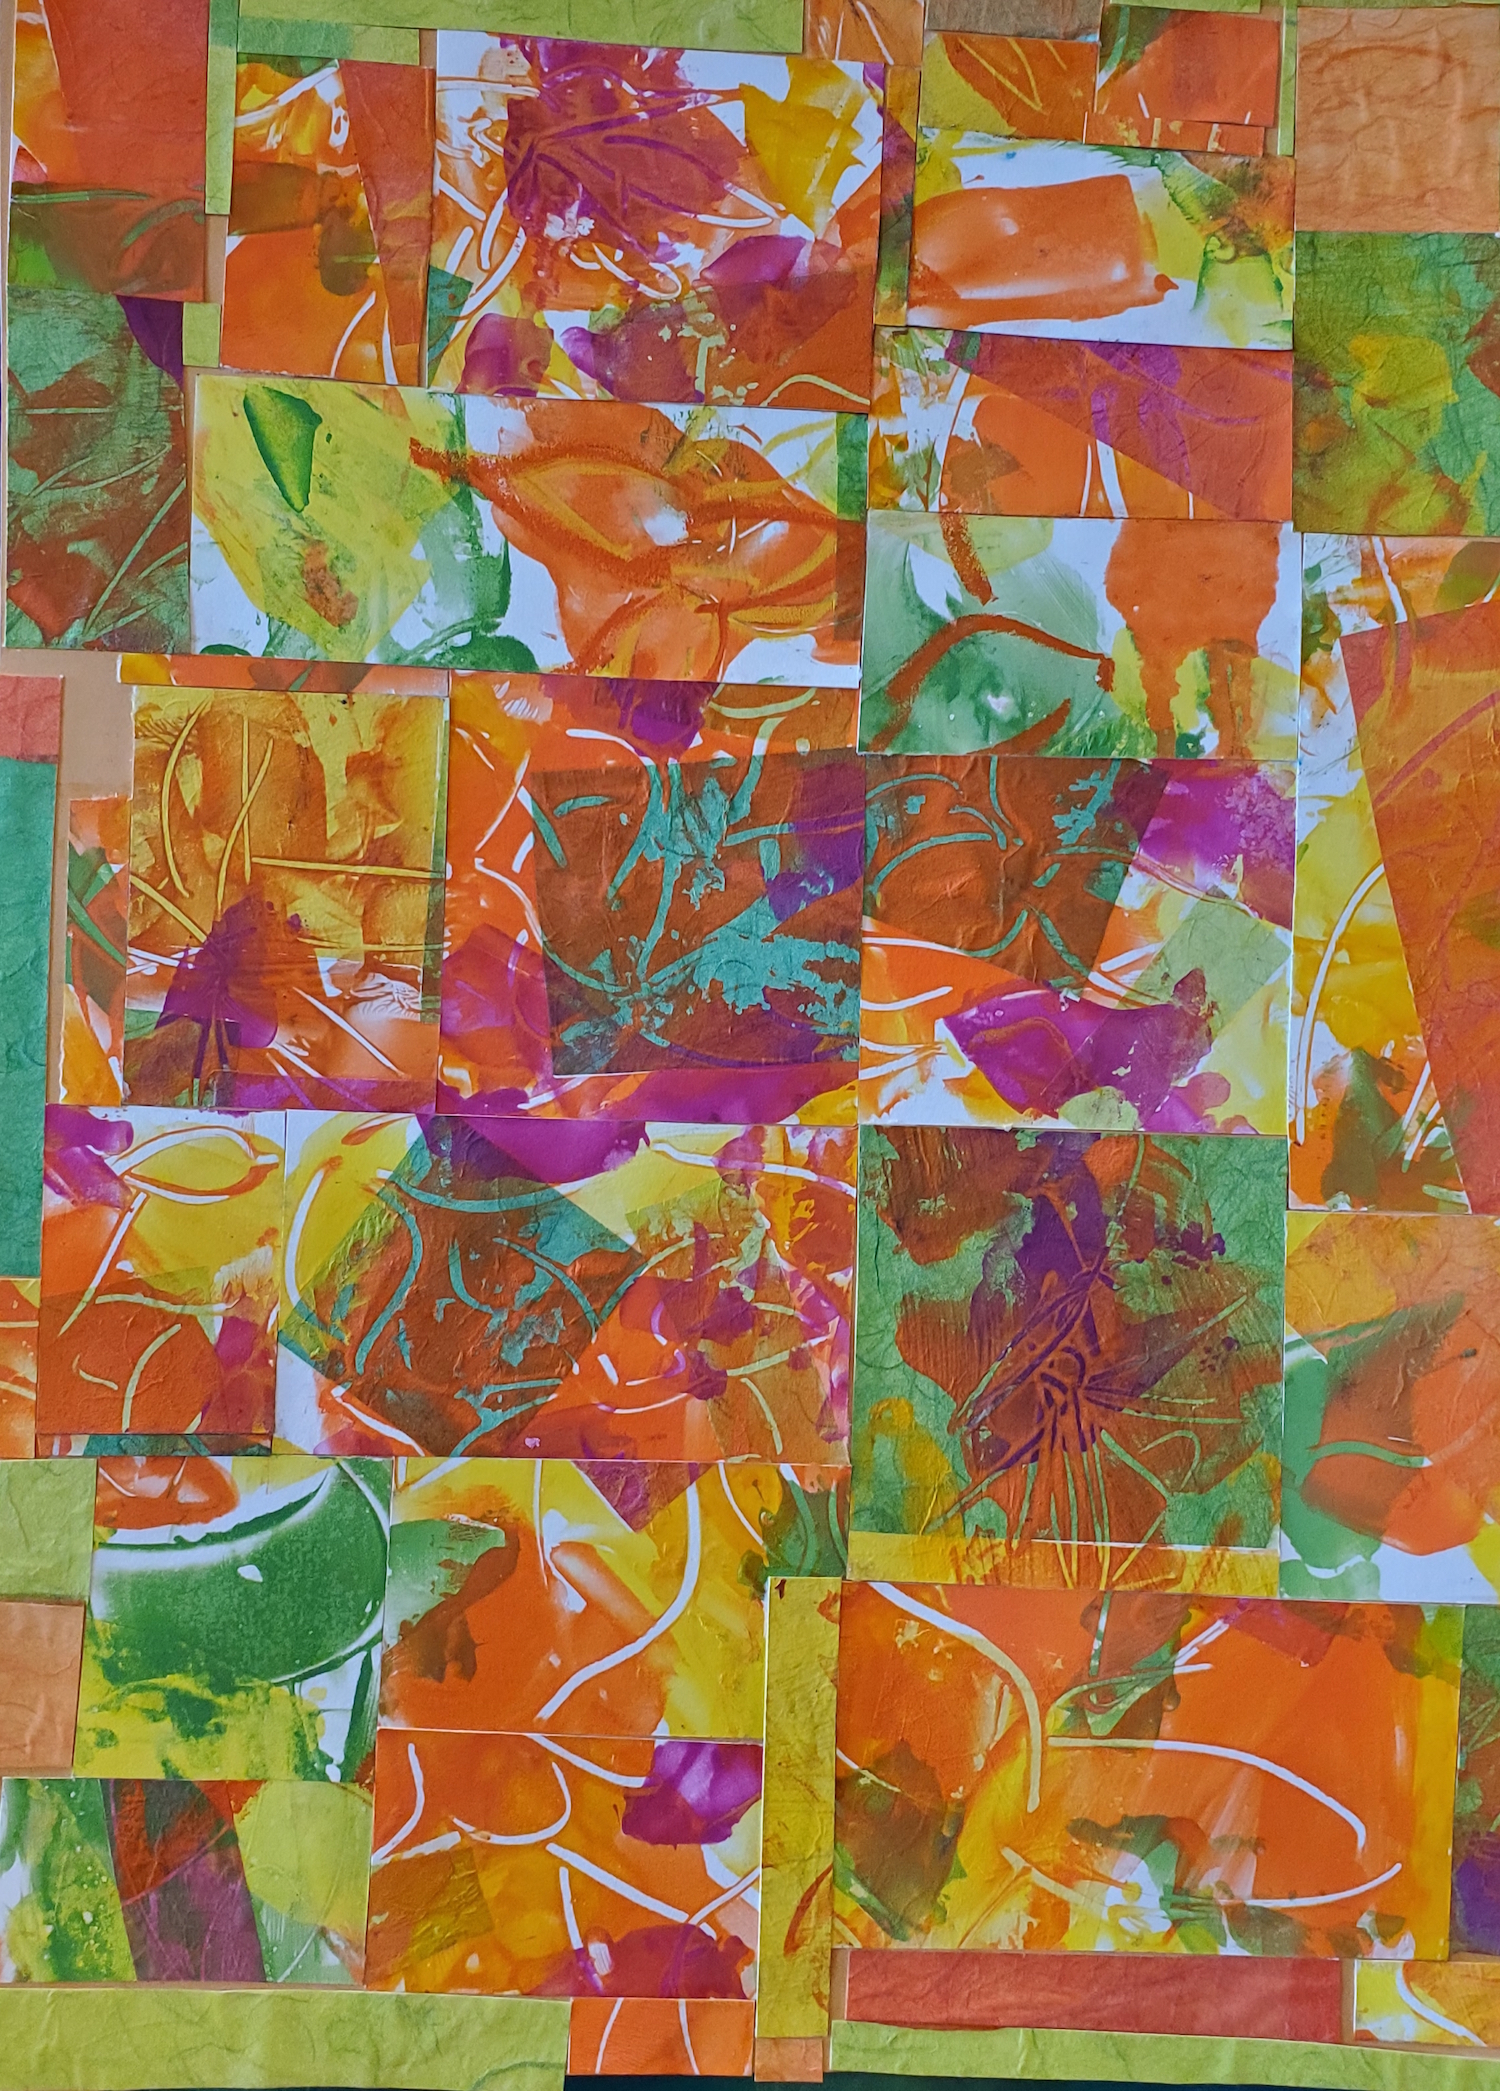  Anne Joëlle Galley, Recycled Collaged Monotypes, 20 x 14.5 in. 